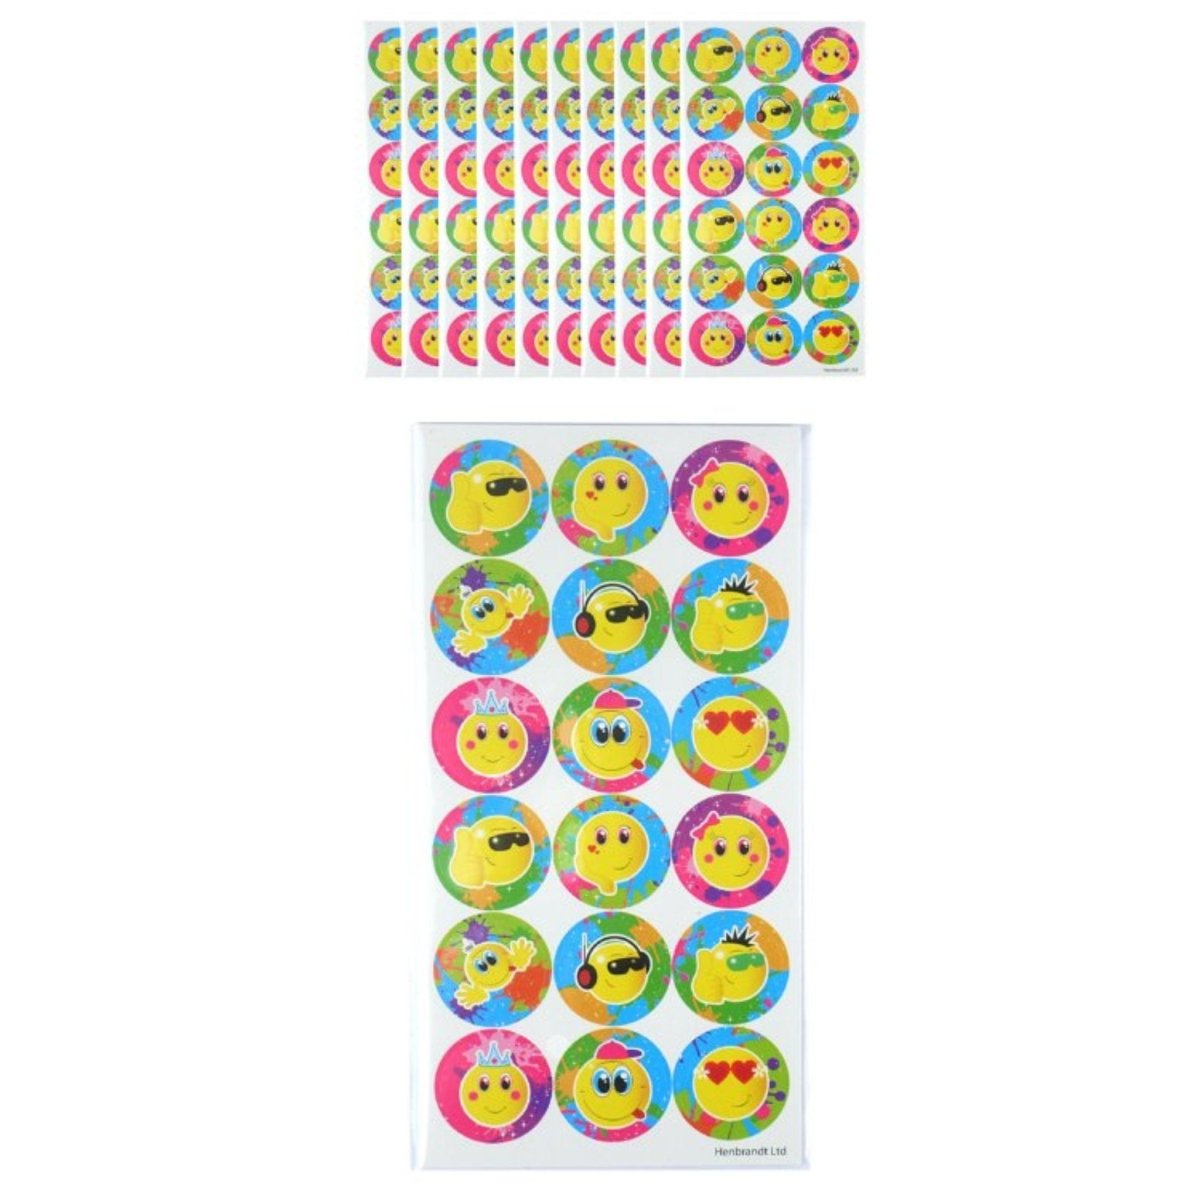 10 Large Smiley Face Sticker Sheets - Kids Party Craft